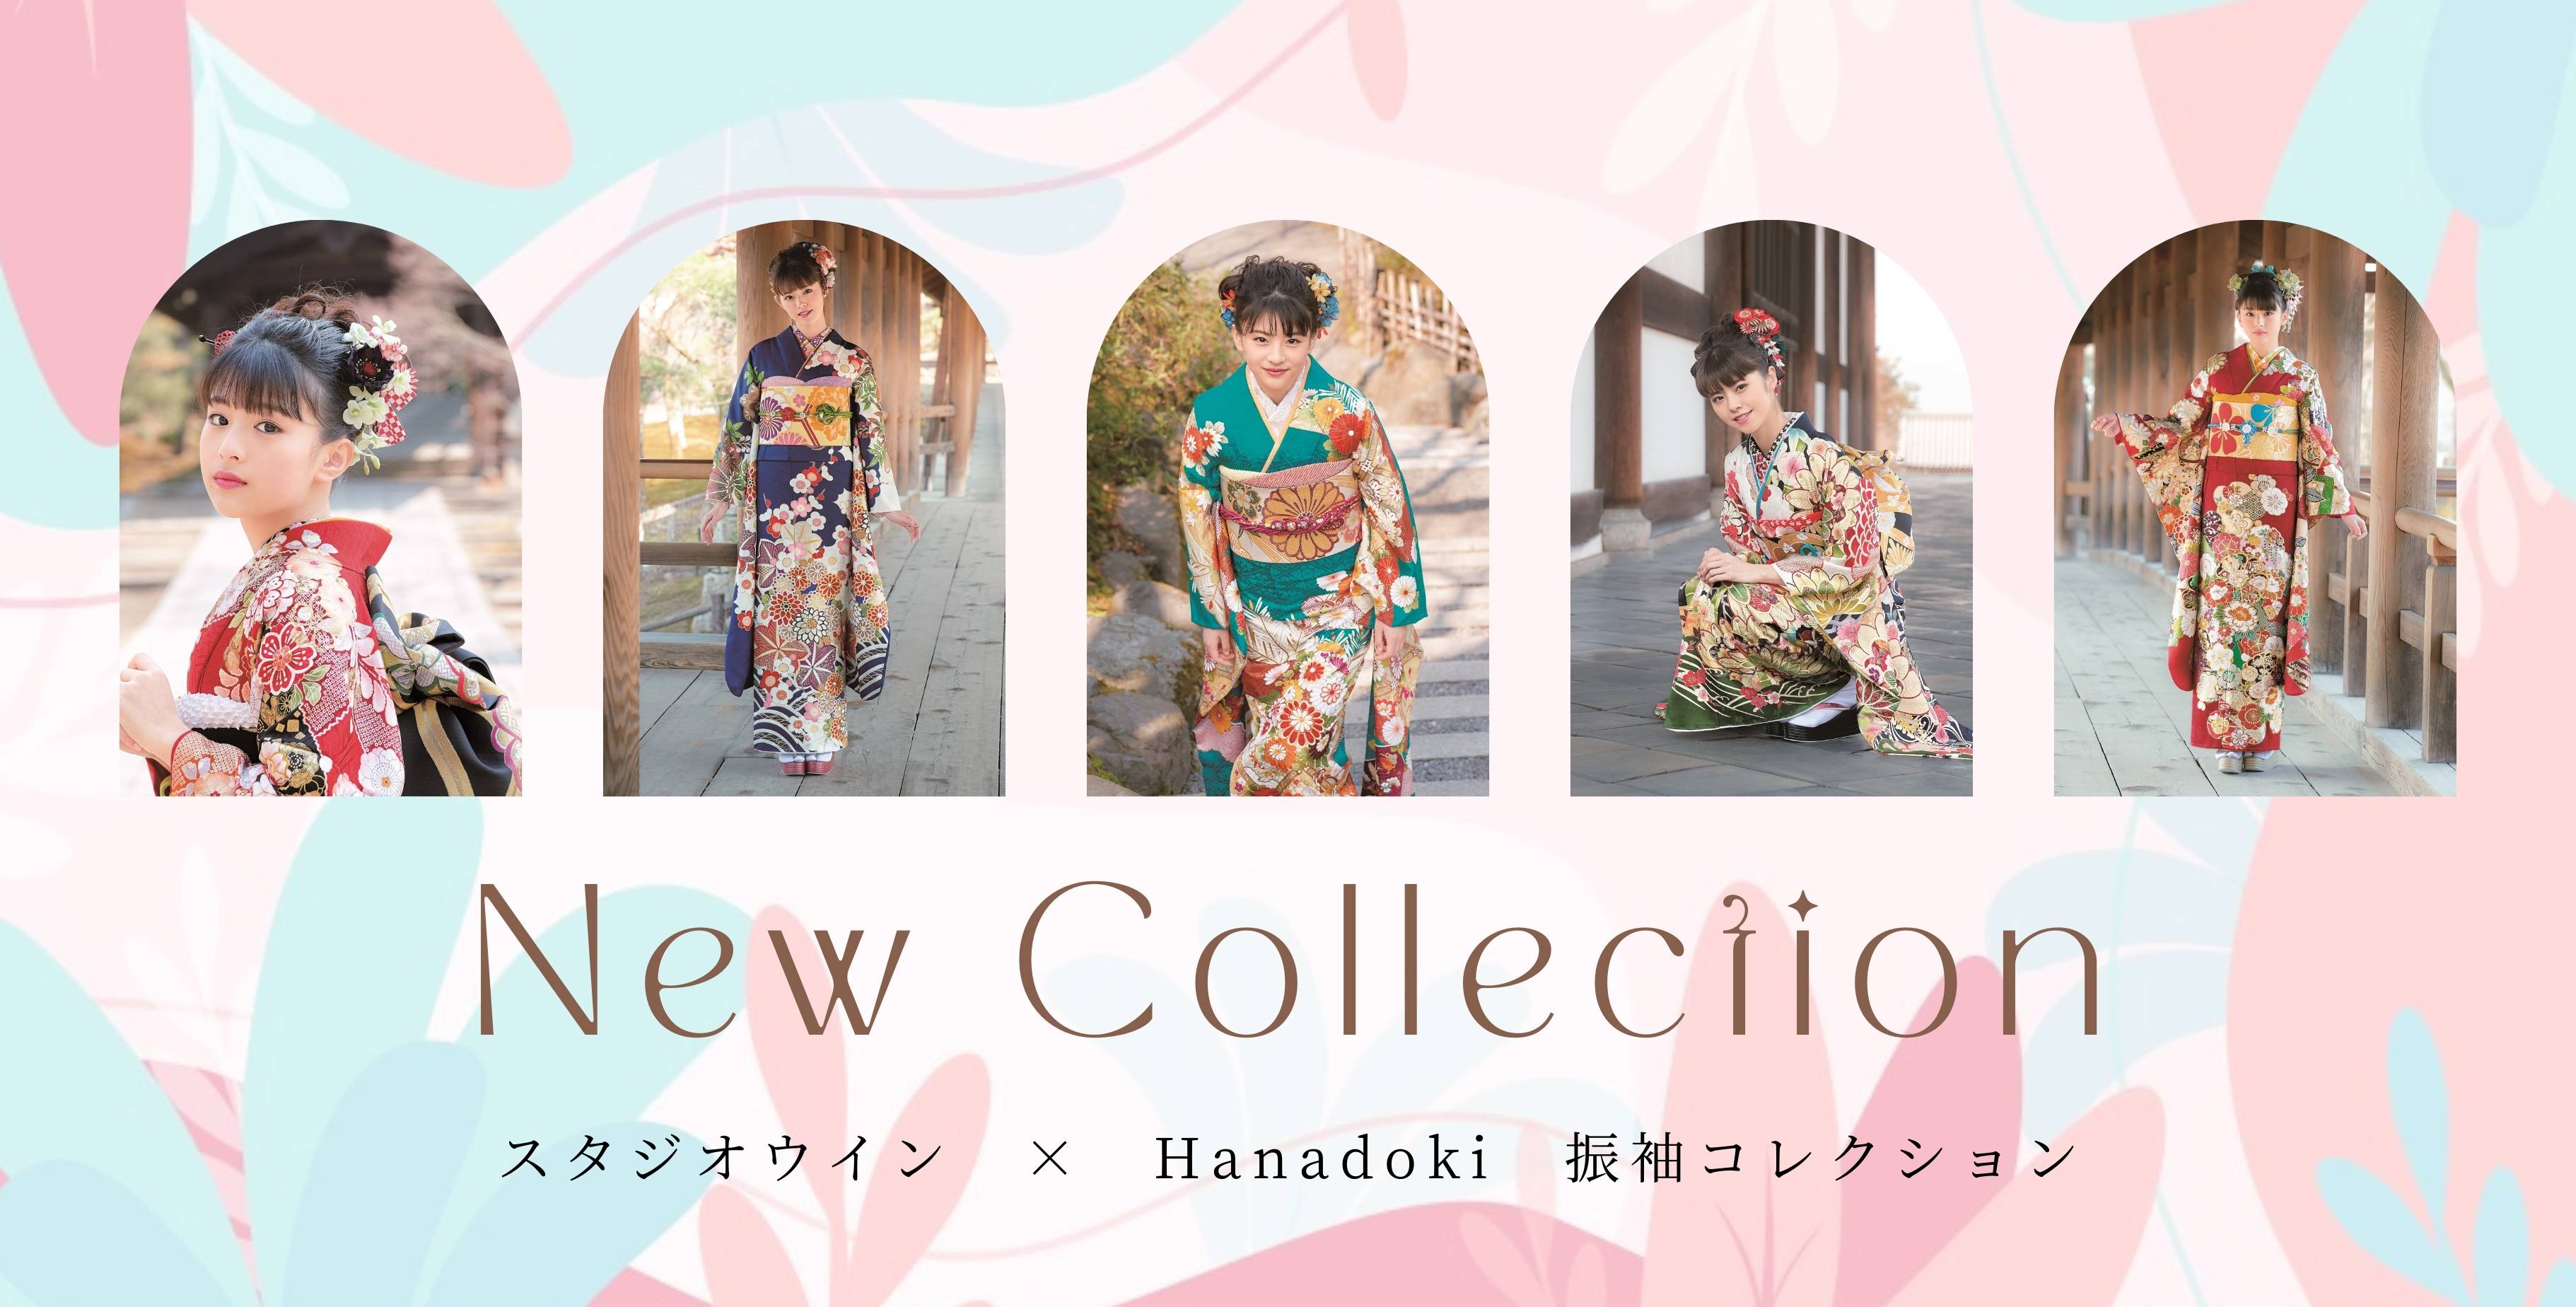 New Collection